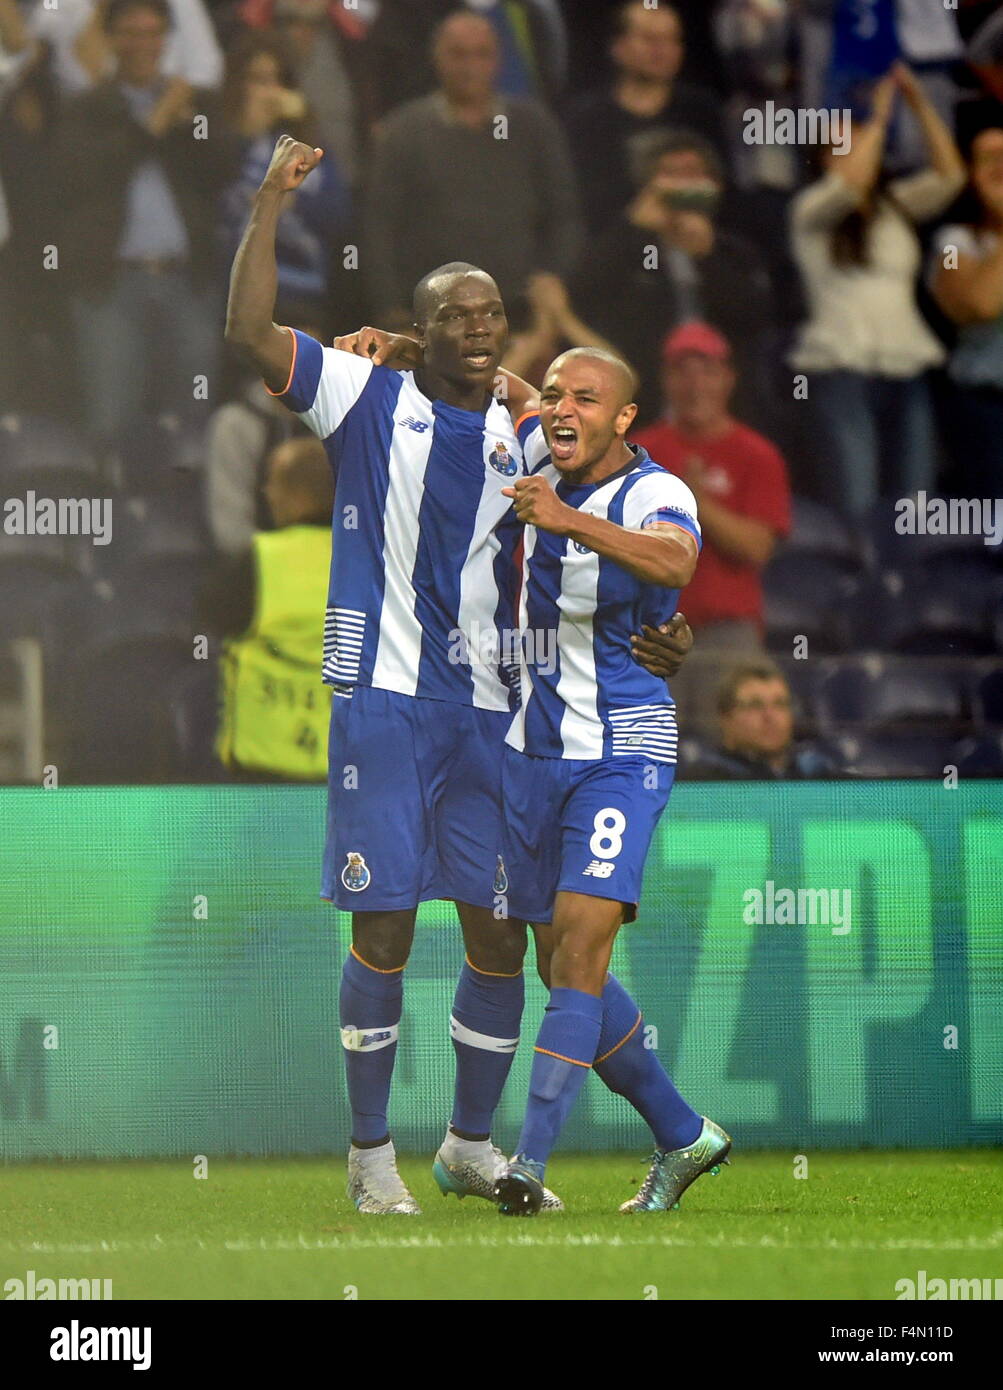 Porto, Portugal. 20th Oct, 2015. Yacine Brahimi (R) of Porto celebrates with his teammate after scoring against Maccabi Tel-Avivin Porto during the UEFA Champions League group G football match, in Porto, Portugal, Oct. 20, 2015. Porto won 2-0. Credit:  Zhang Liyun/Xinhua/Alamy Live News Stock Photo